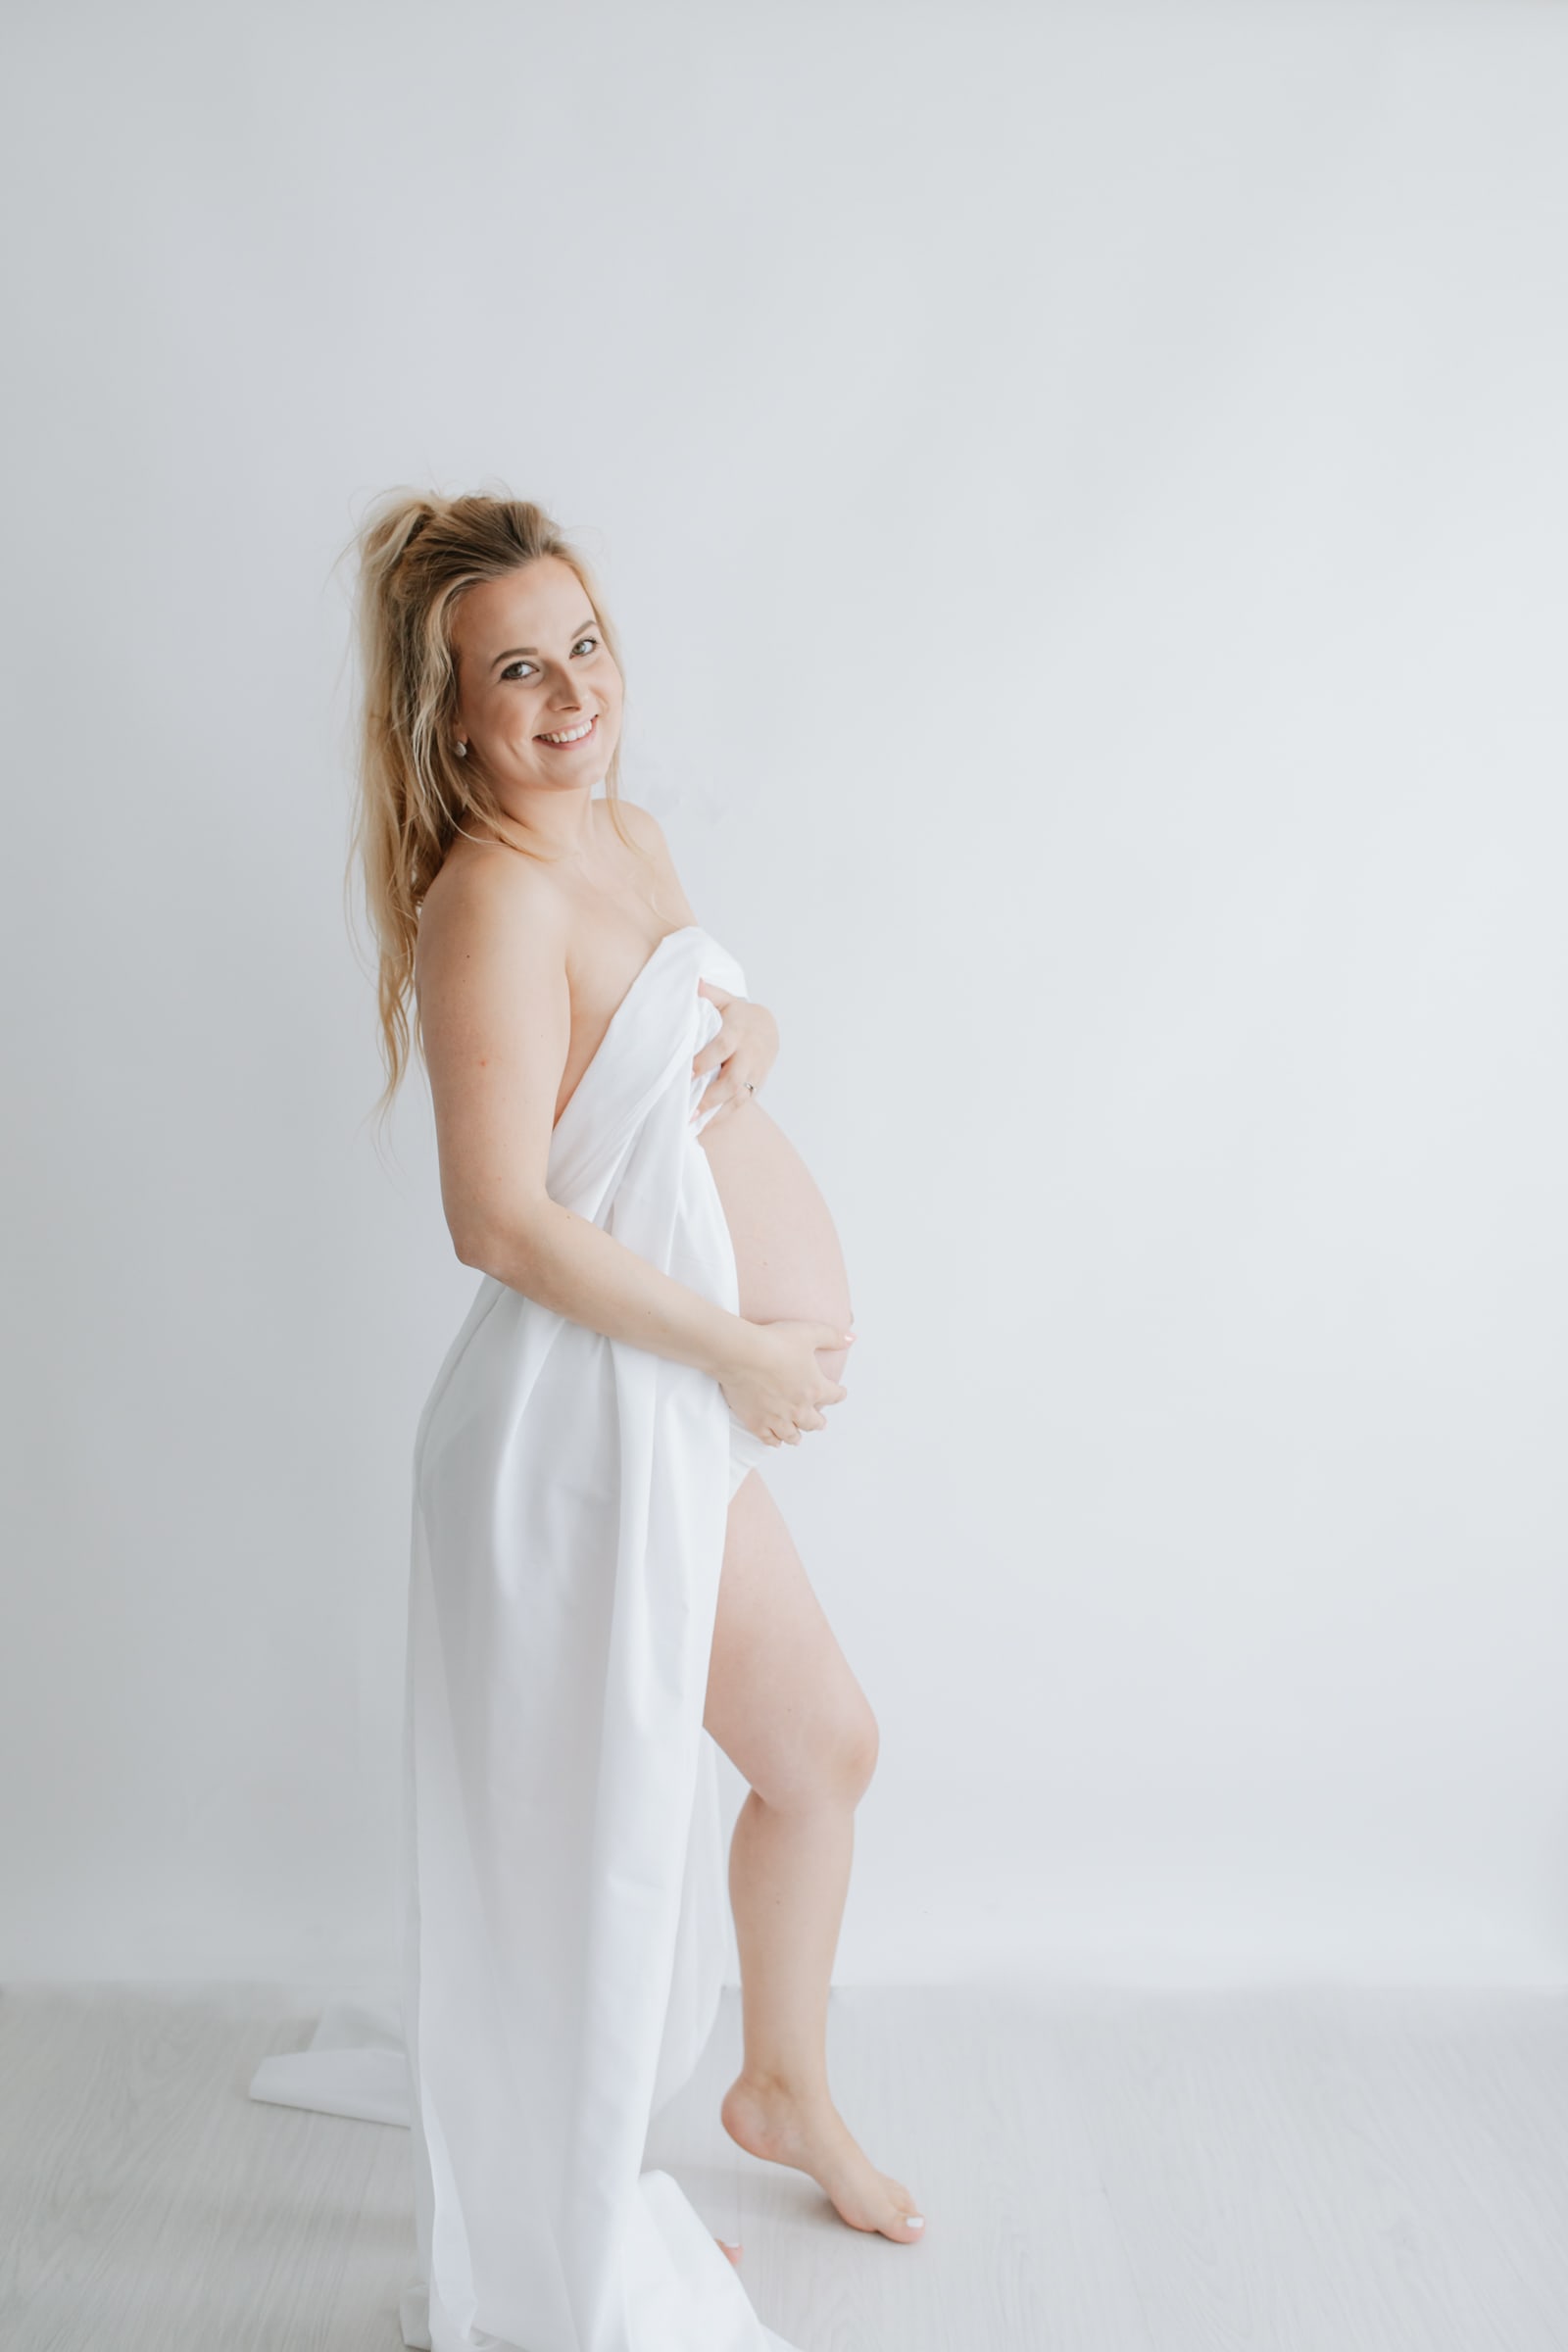 mummy to be taken at her Kent maternity photoshoot in Bexley